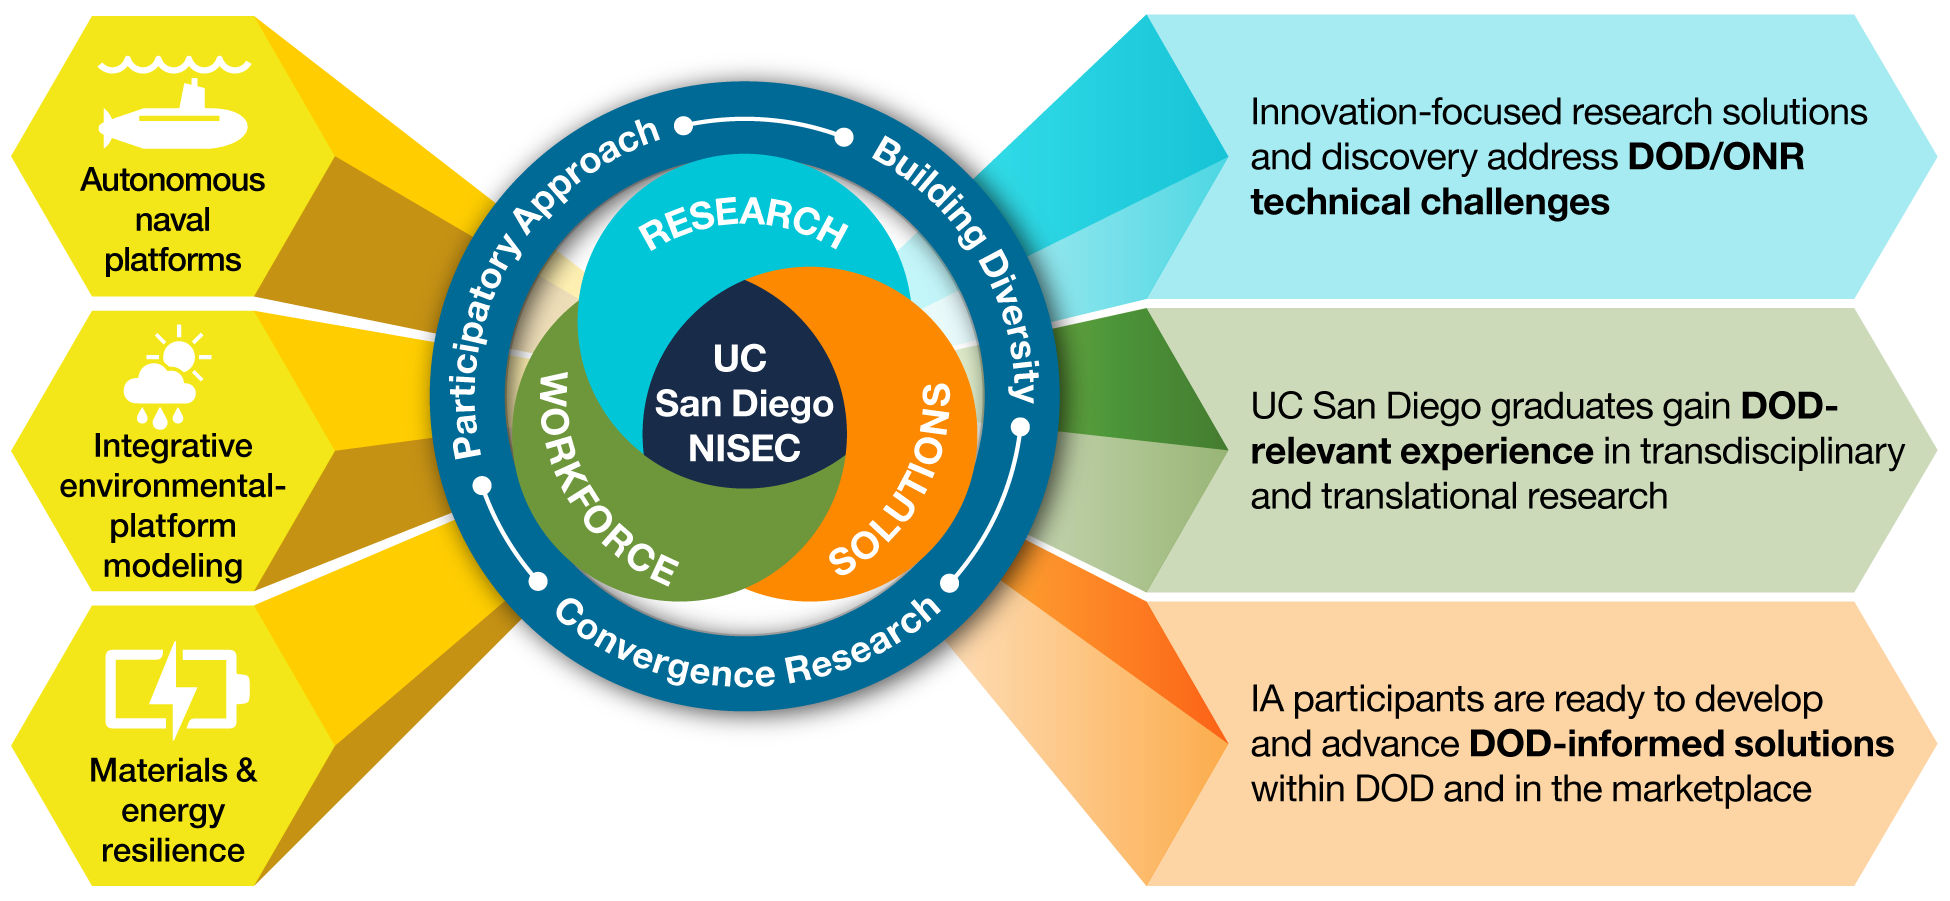 The infographic provides an overview of NISEC's scope of activities in research, workforce training, and procurement-oriented technical solutions 